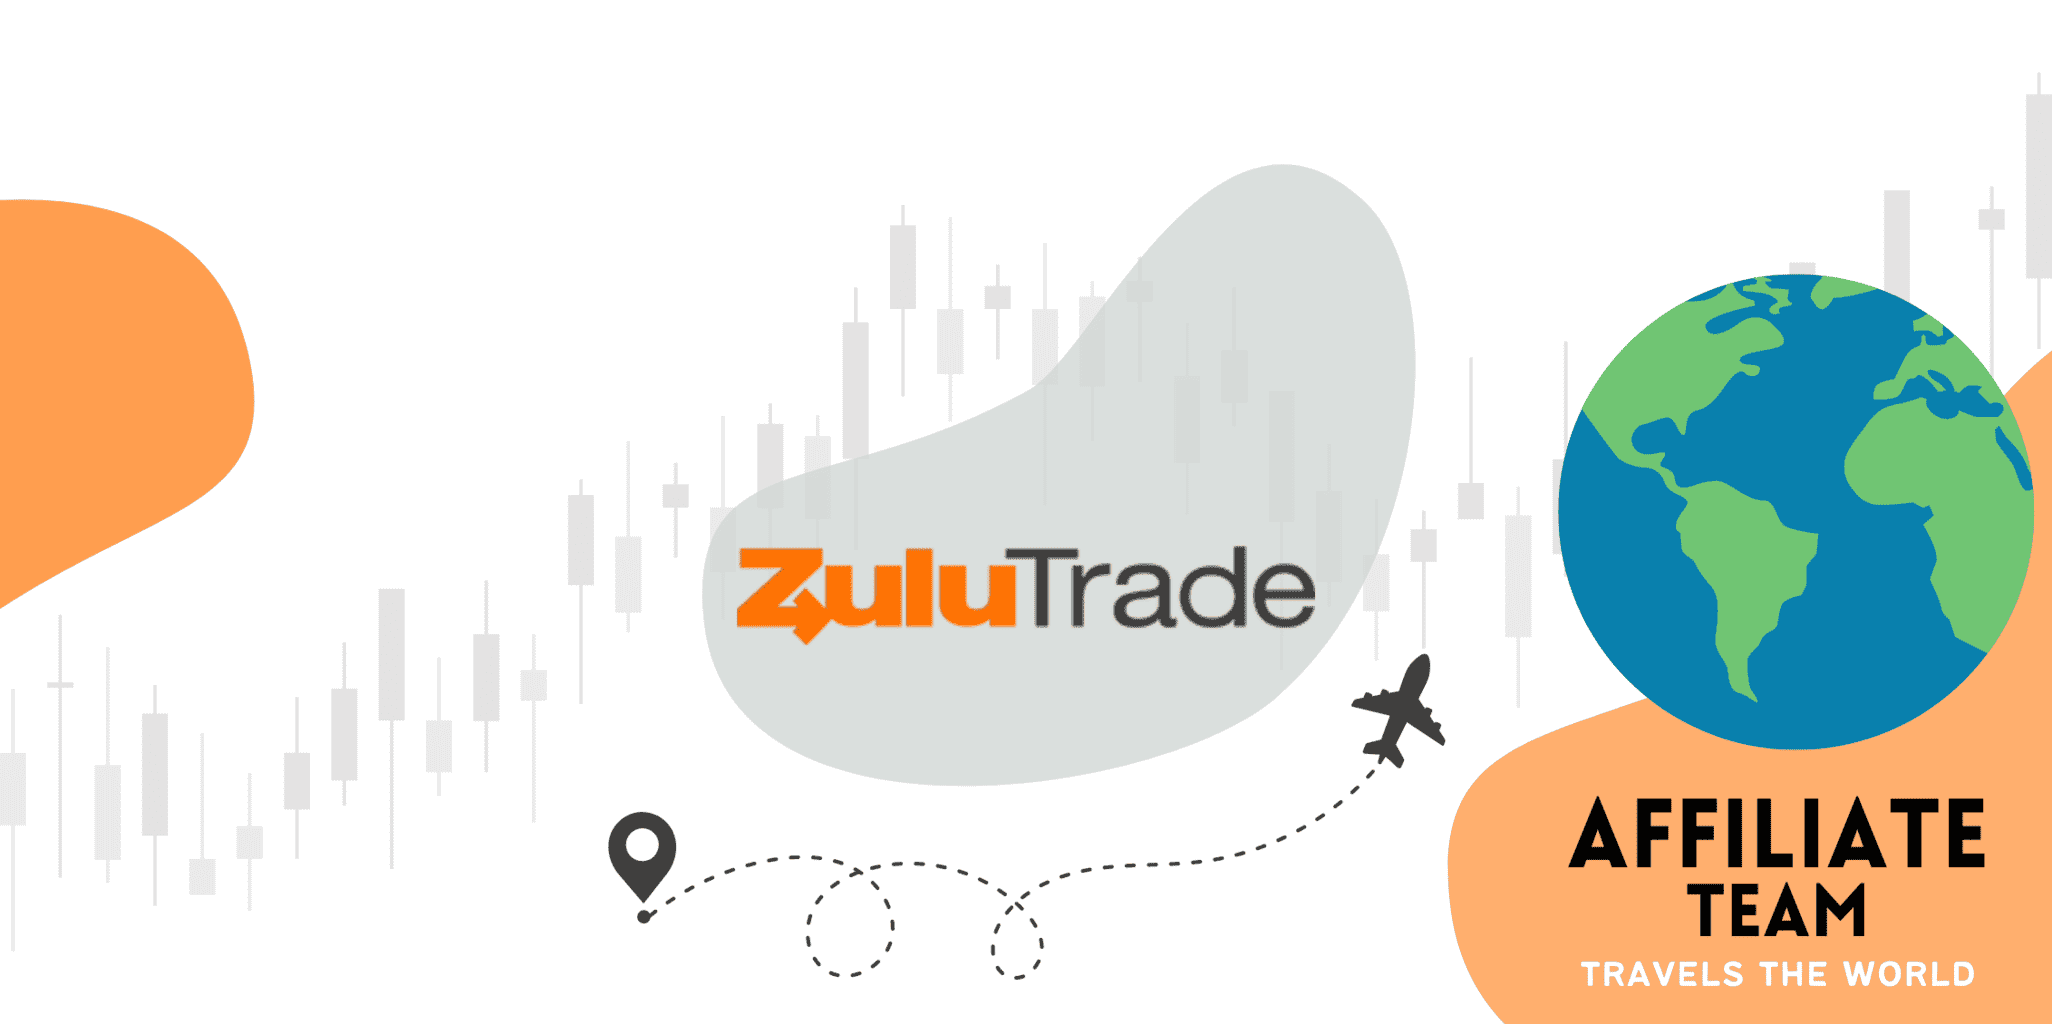 4 key takeaways to maximise attendance at industry conferences, powered by the ZuluTrade affiliate marketing team